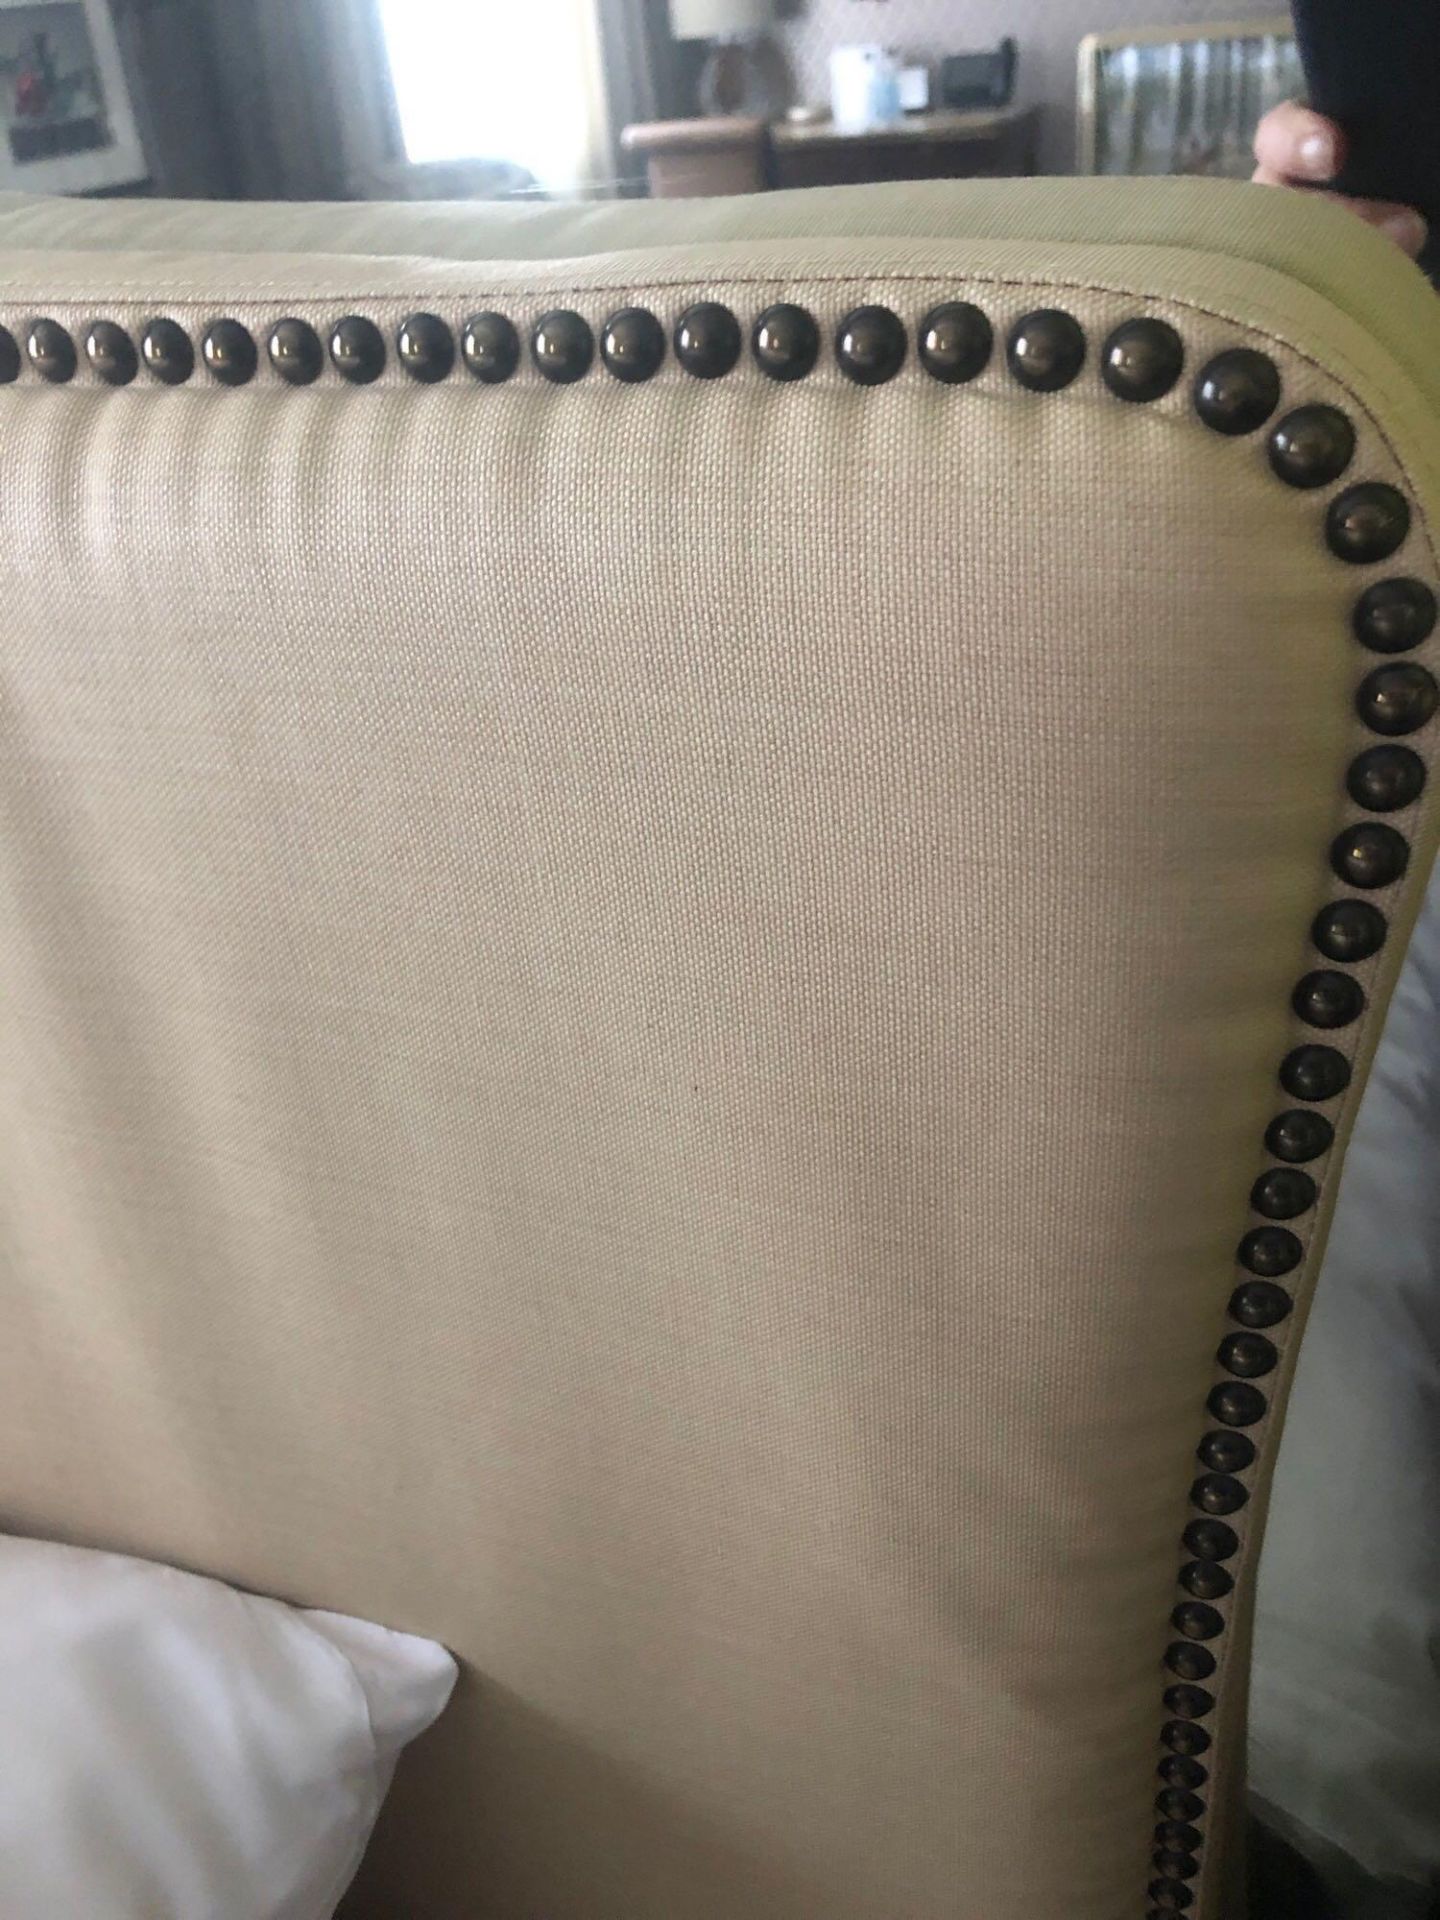 Headboard, Handcrafted With Nail Trim And Padded Textured Woven Upholstery In Cream With Black And - Bild 3 aus 4